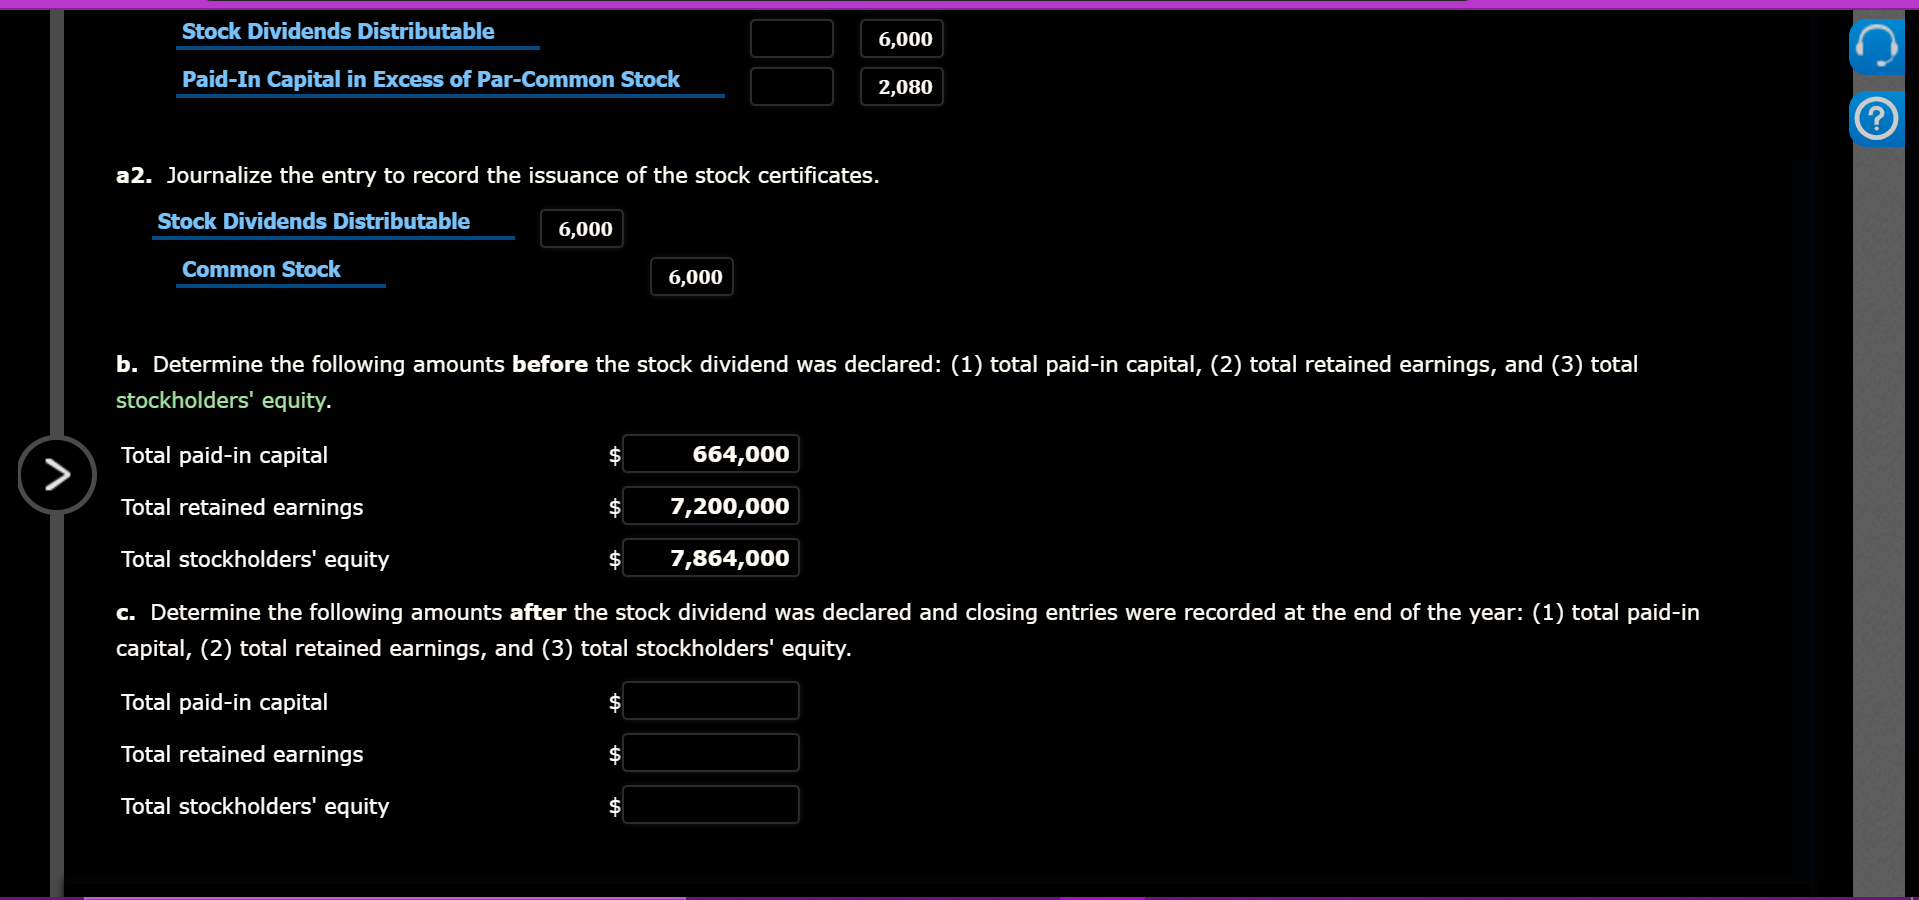 Stock Dividends Distributable
6,000
Paid-In Capital in Excess of Par-Common Stock
2,080
a2. Journalize the entry to record the isuance of the stock certificates.
Stock Dividends Distributable
6,000
Common Stock
6,000
b. Determine the following amounts before the stock dividend was declared: (1) total paid-in capital, (2) total retained earnings, and (3) total
stockholders' equity.
Total paid-in capital
664,000
Total retained earnings
$
7,200,000
Total stockholders' equity
7,864,000
c. Determine the following amounts after the stock dividend was declared and closing entries were recorded at the end of the year: (1) total paid-in
capital, (2) total retained earnings, and (3) total stockholders' equity.
Total paid-in capital
Total retained earnings
Total stockholders' equity
